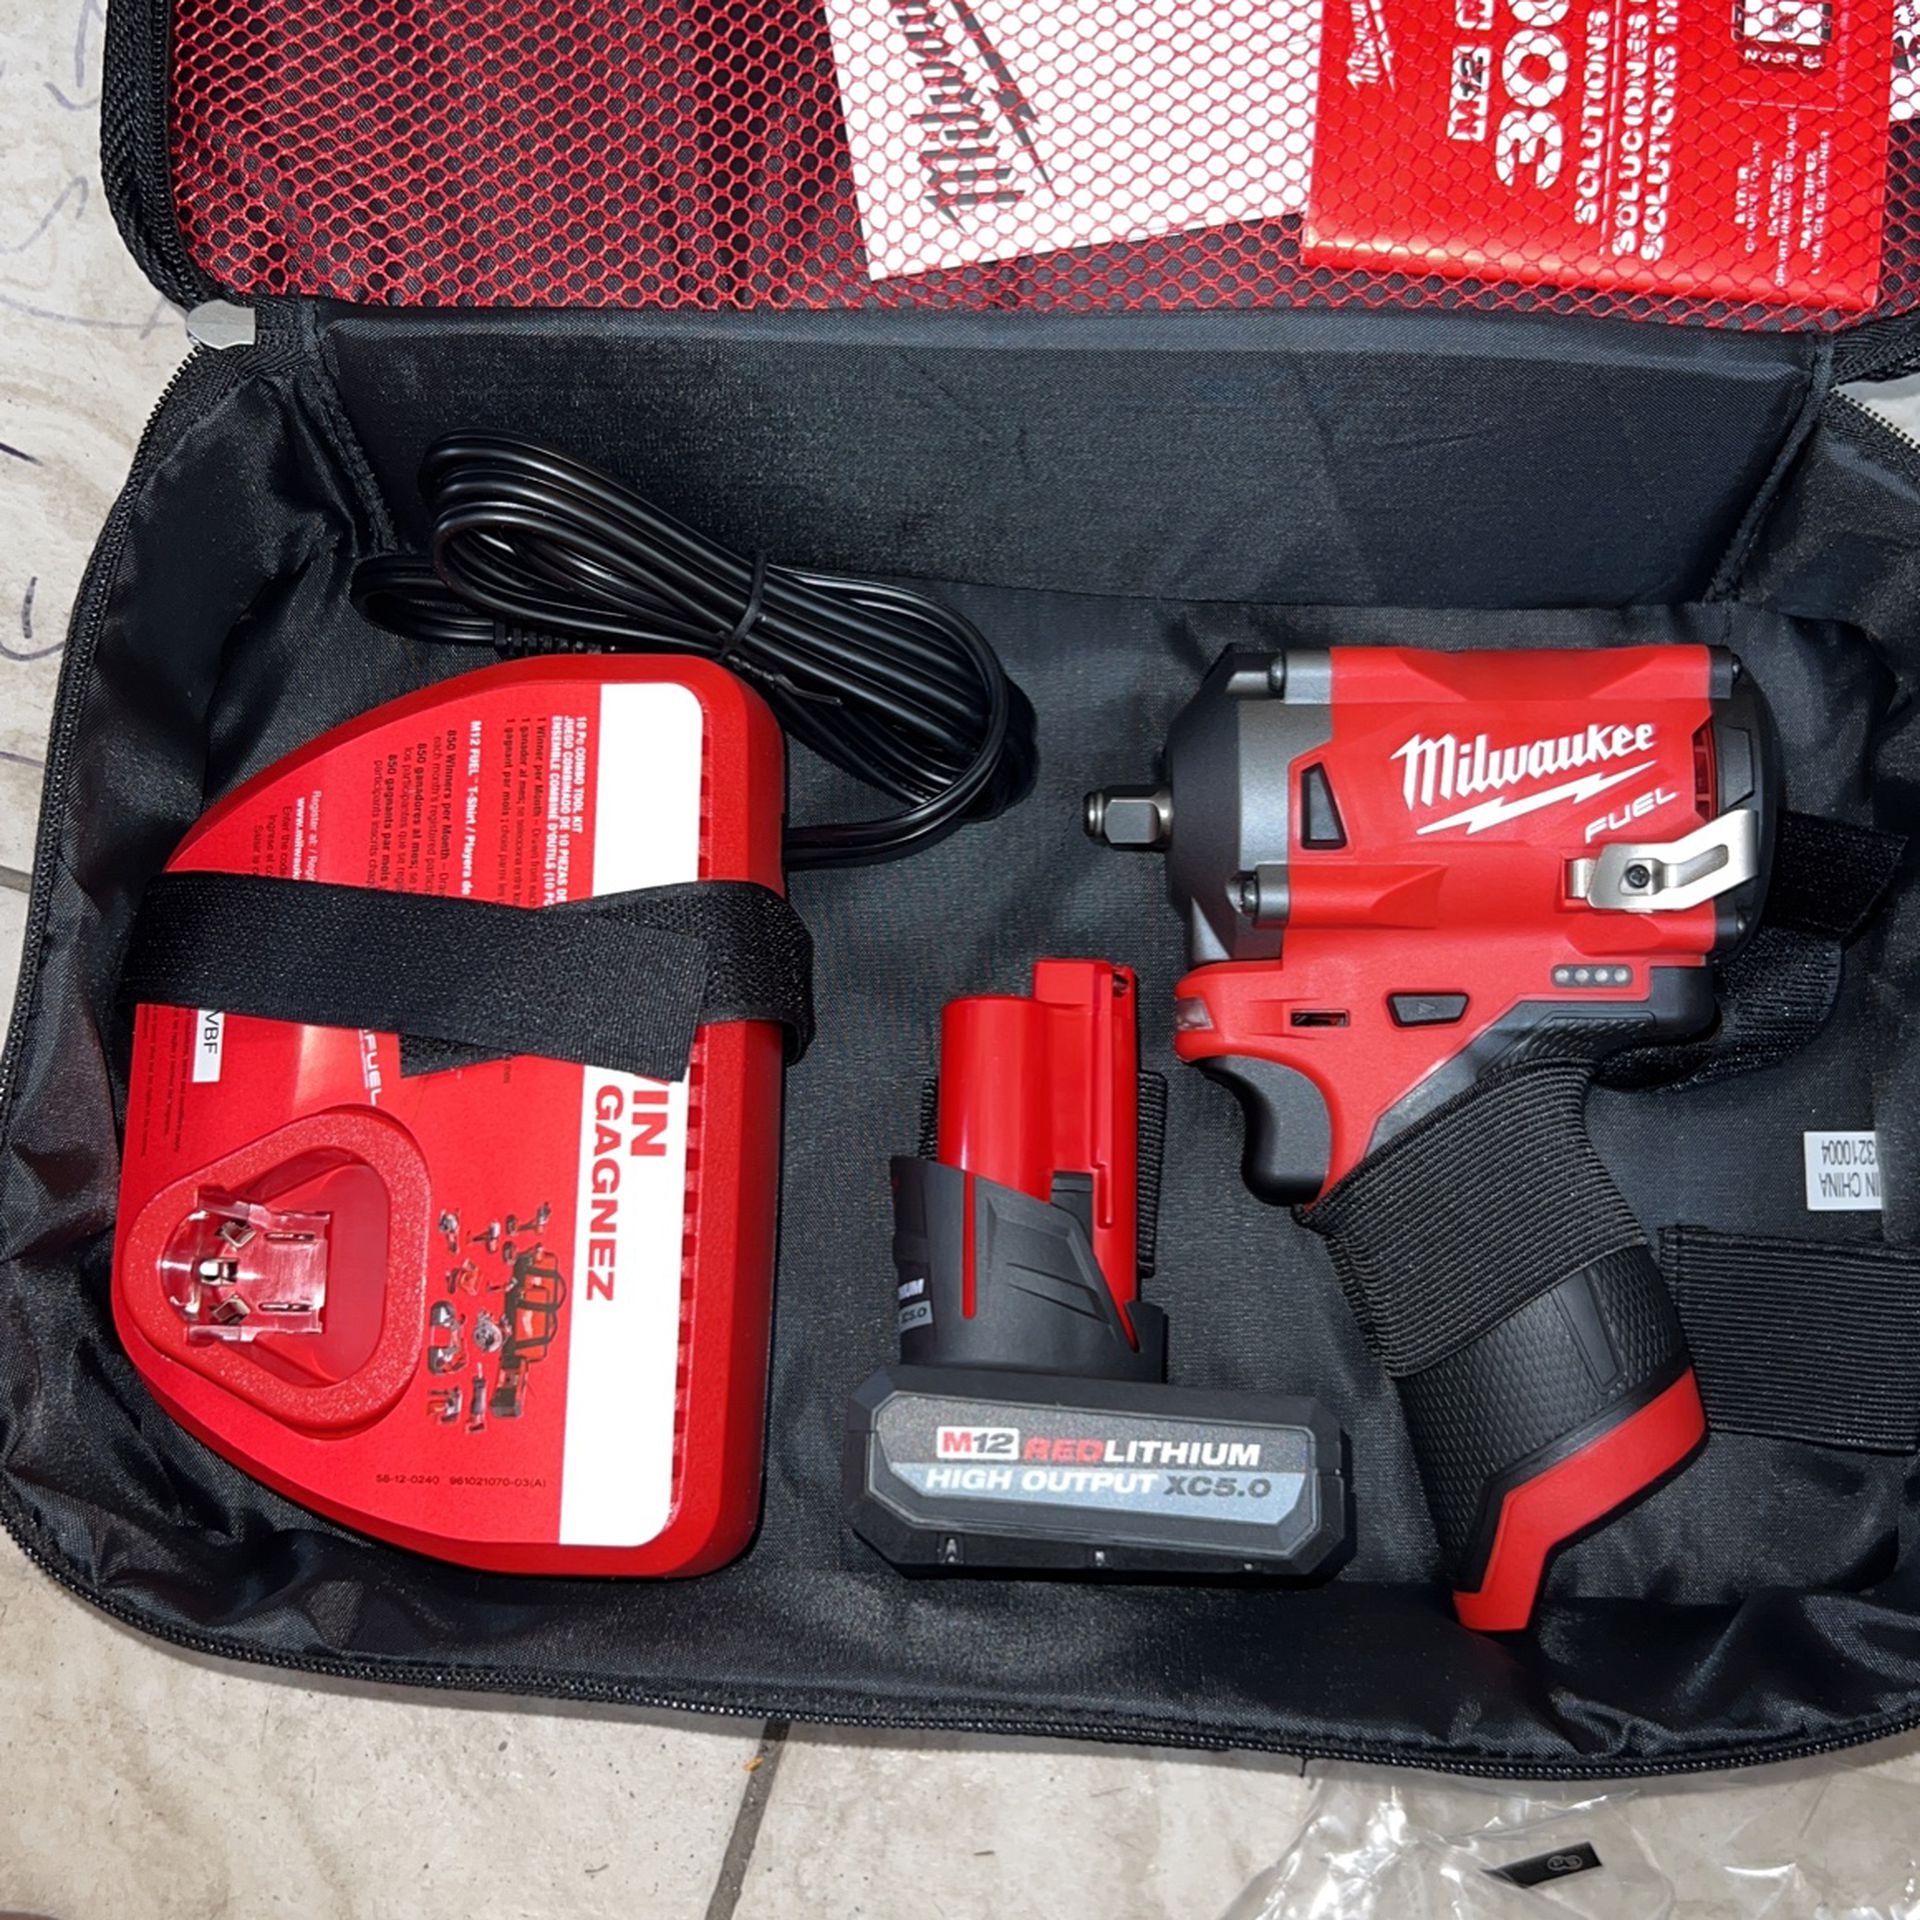 Milwaukee M12 FUEL 12-Volt Lithium-lon Brushless Cordless Stubby 3/8 in. Impact  Wrench Kit with (1) High Output 5.0 Ah Battery for Sale in Garden Grove, CA  OfferUp